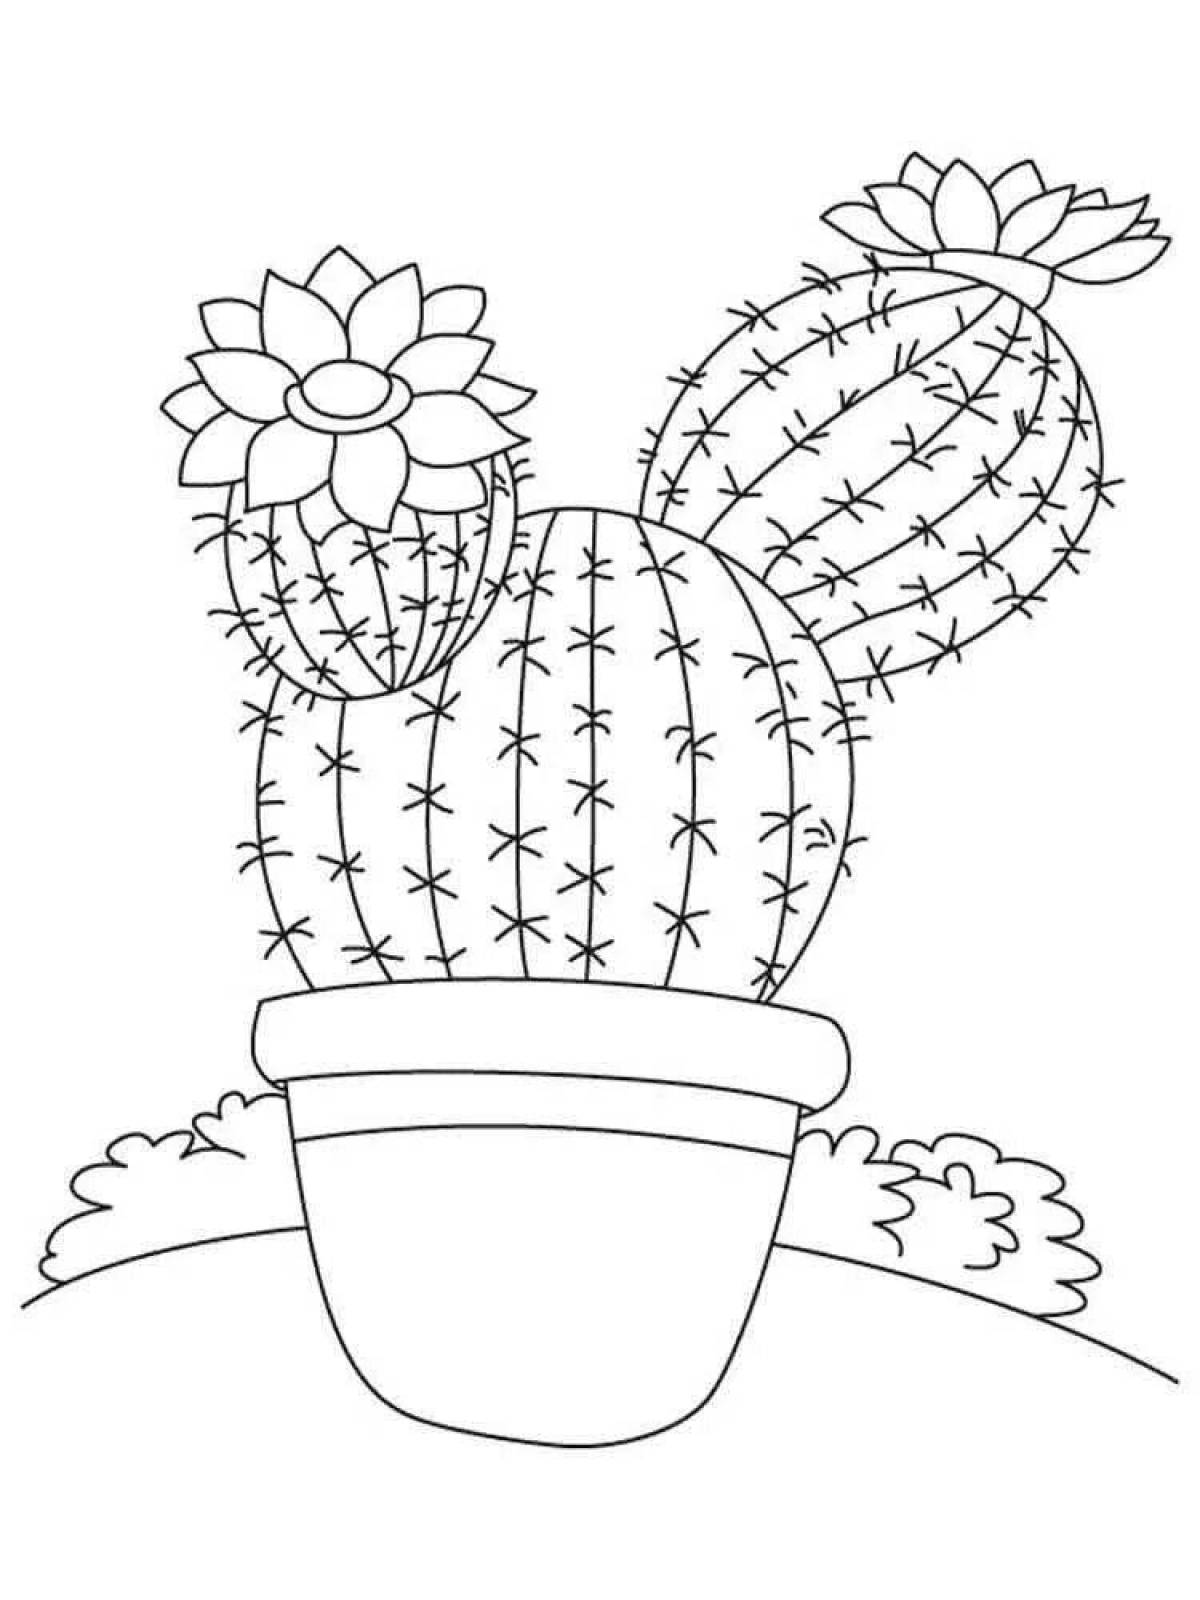 Potted cactus #5